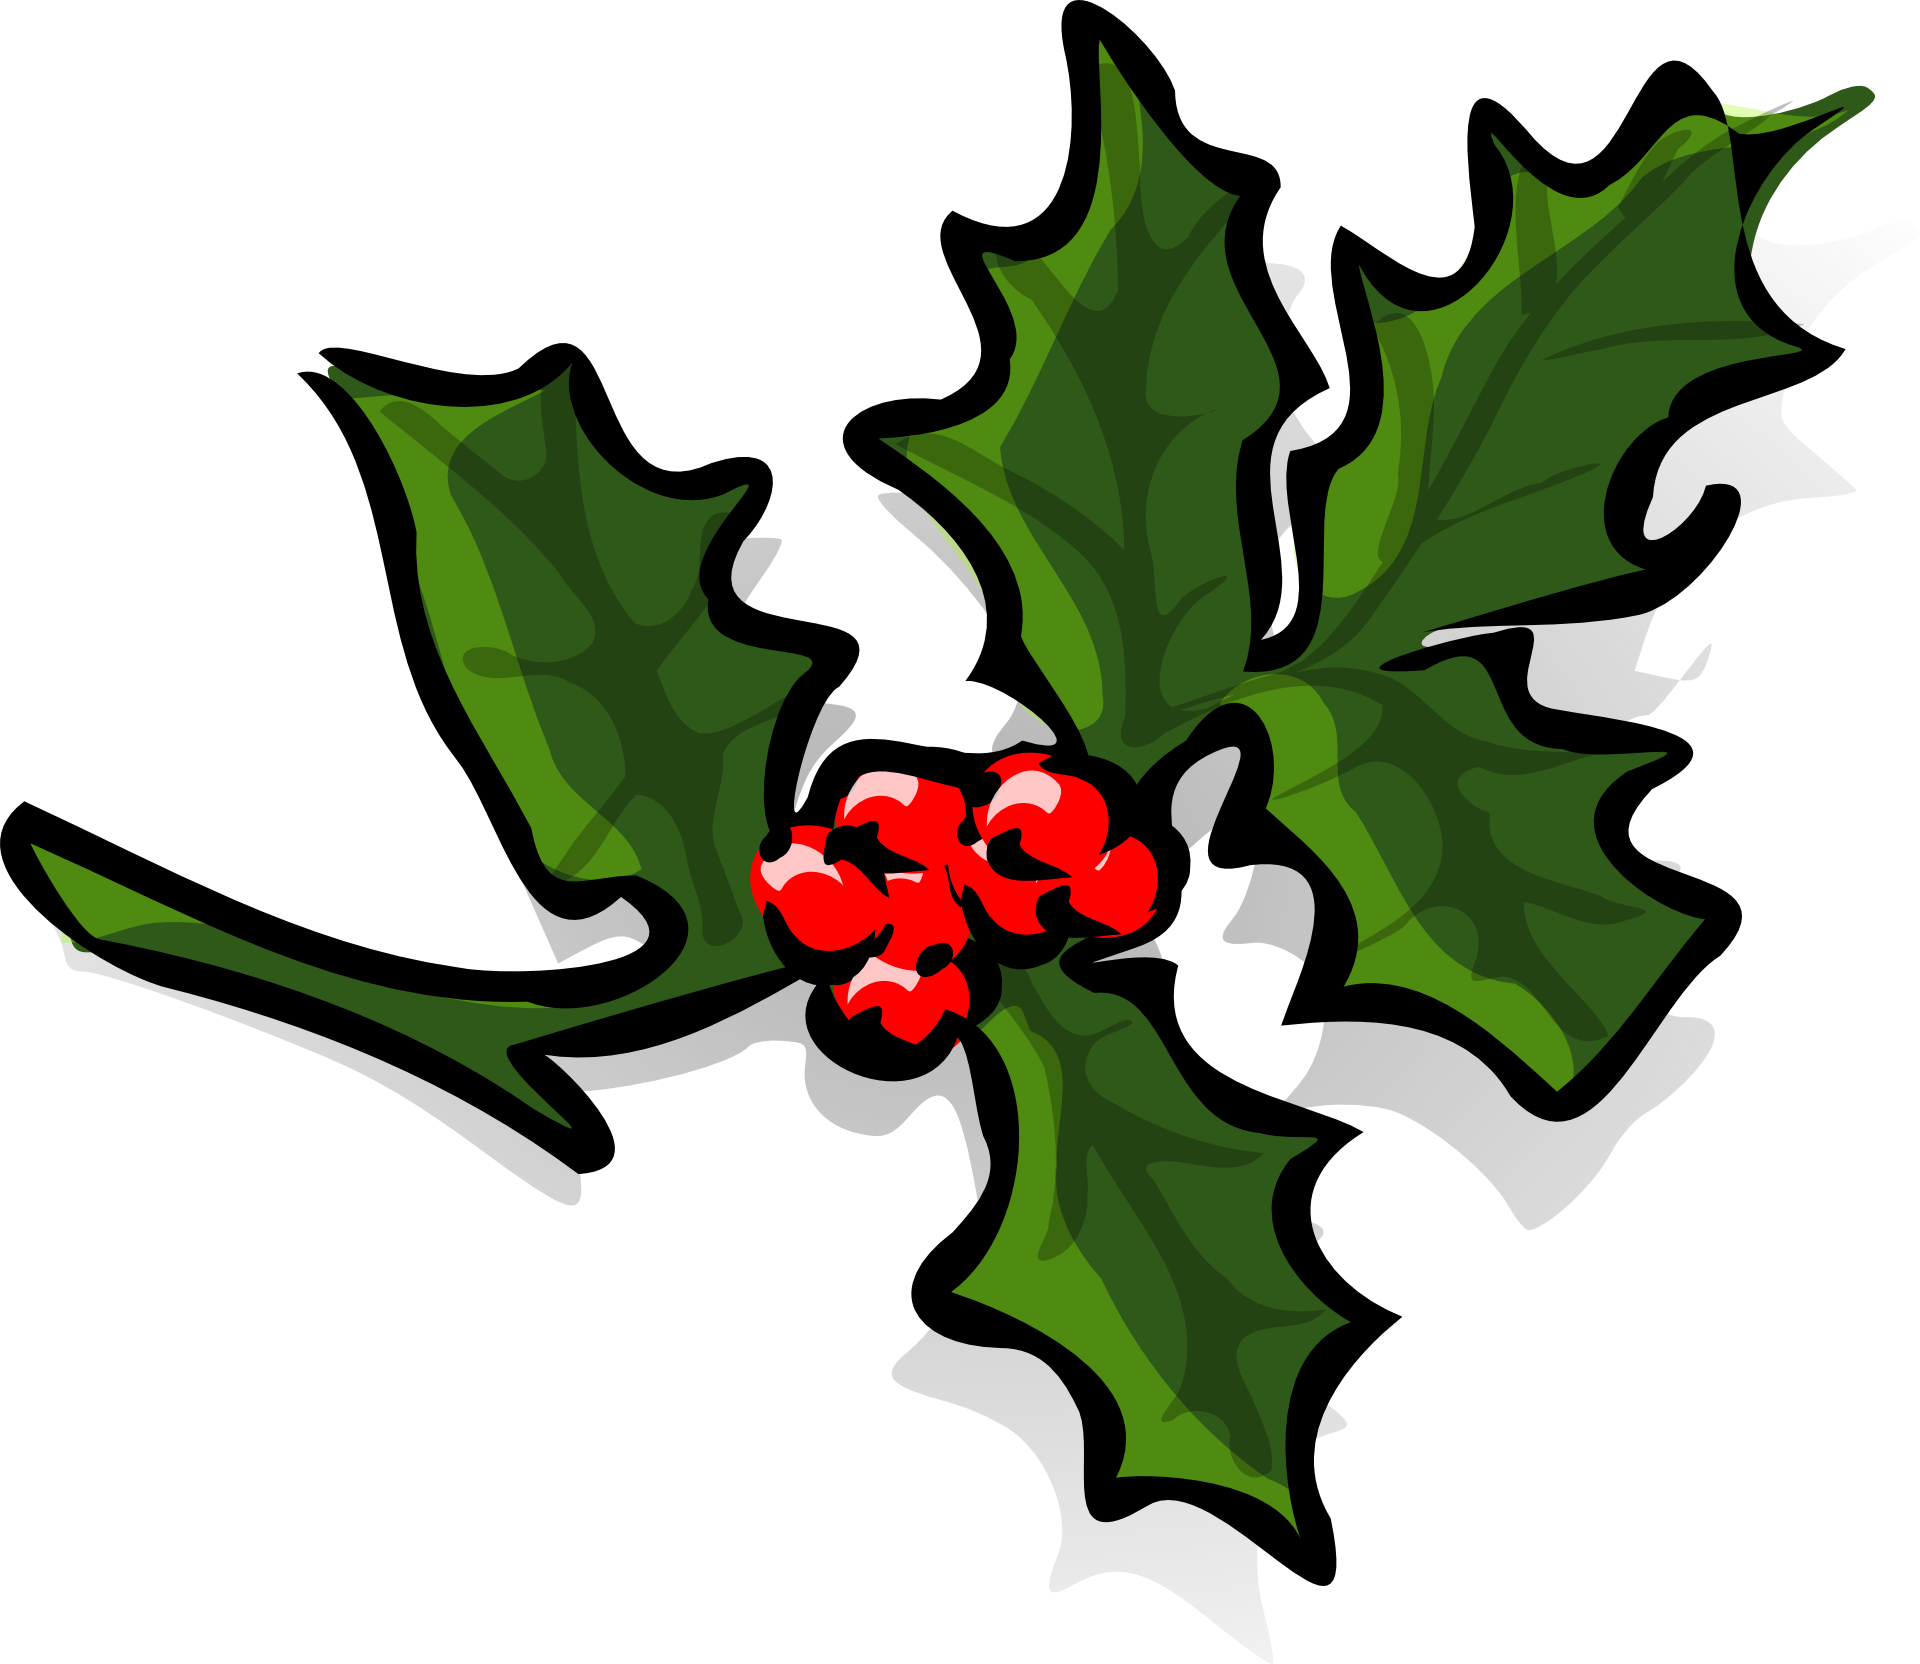 Holly berries christmas drawing free image download